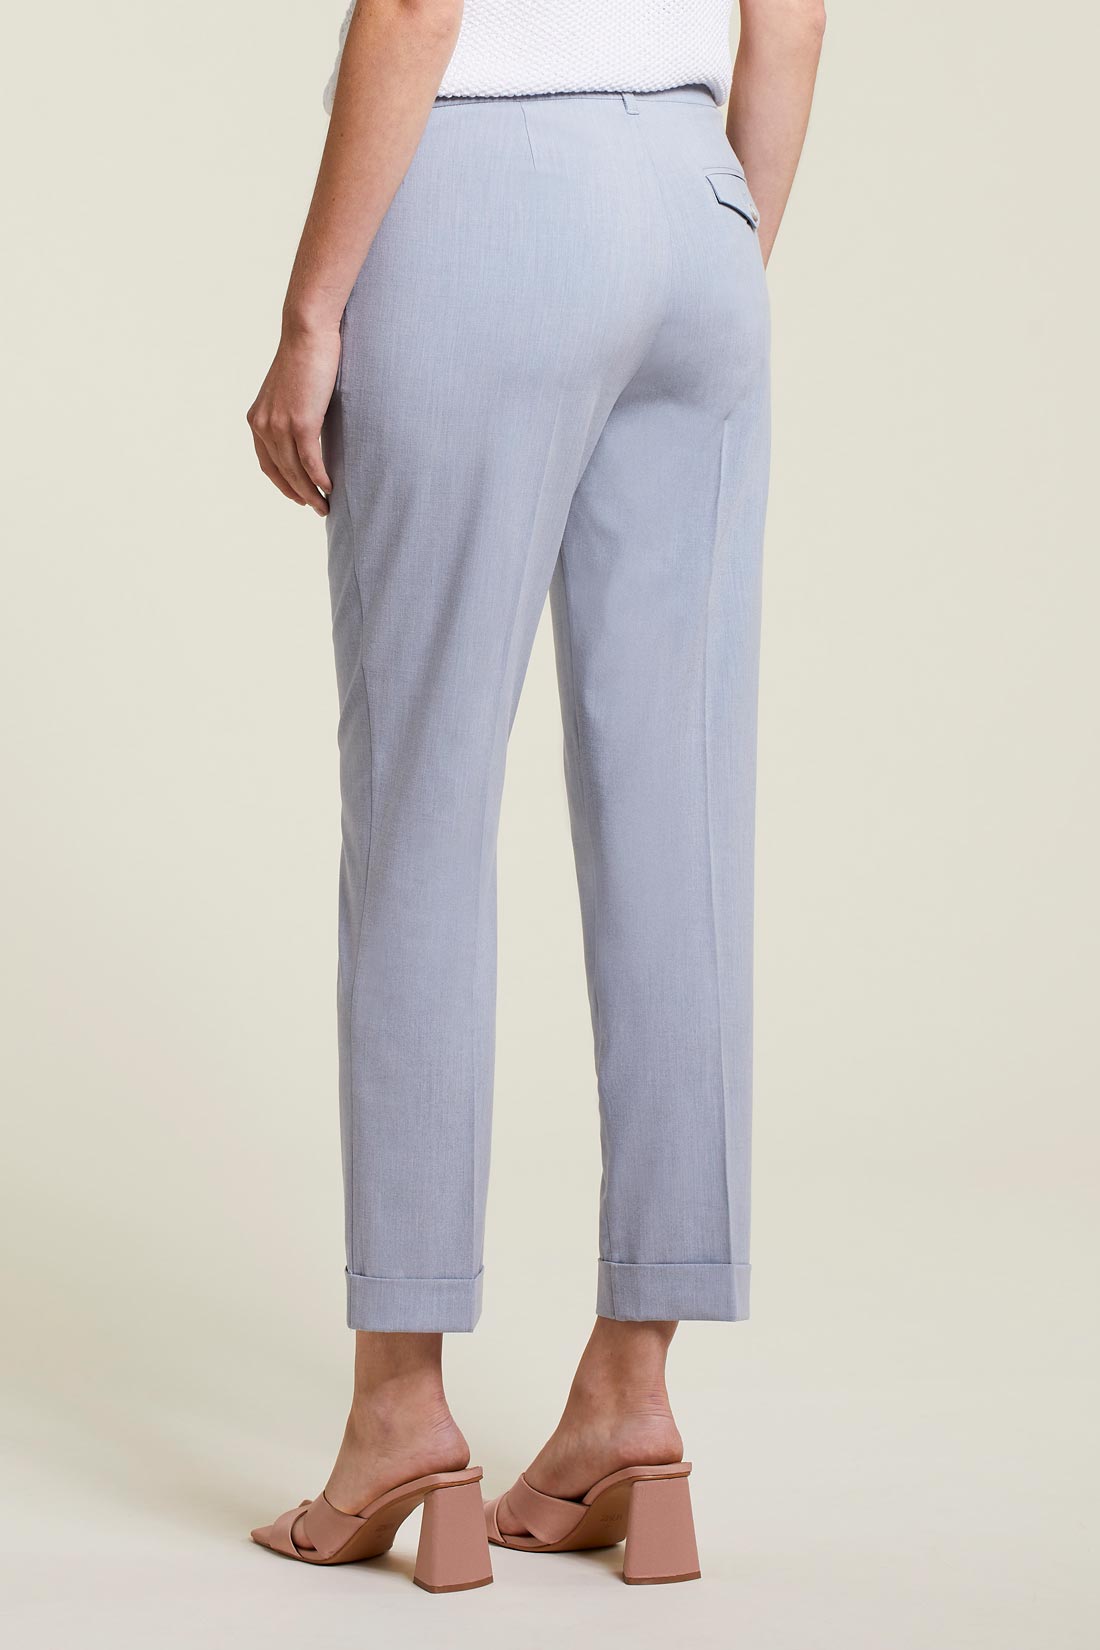 Pearl Blue Front Cuffed Ankle Pant - FINAL SALE